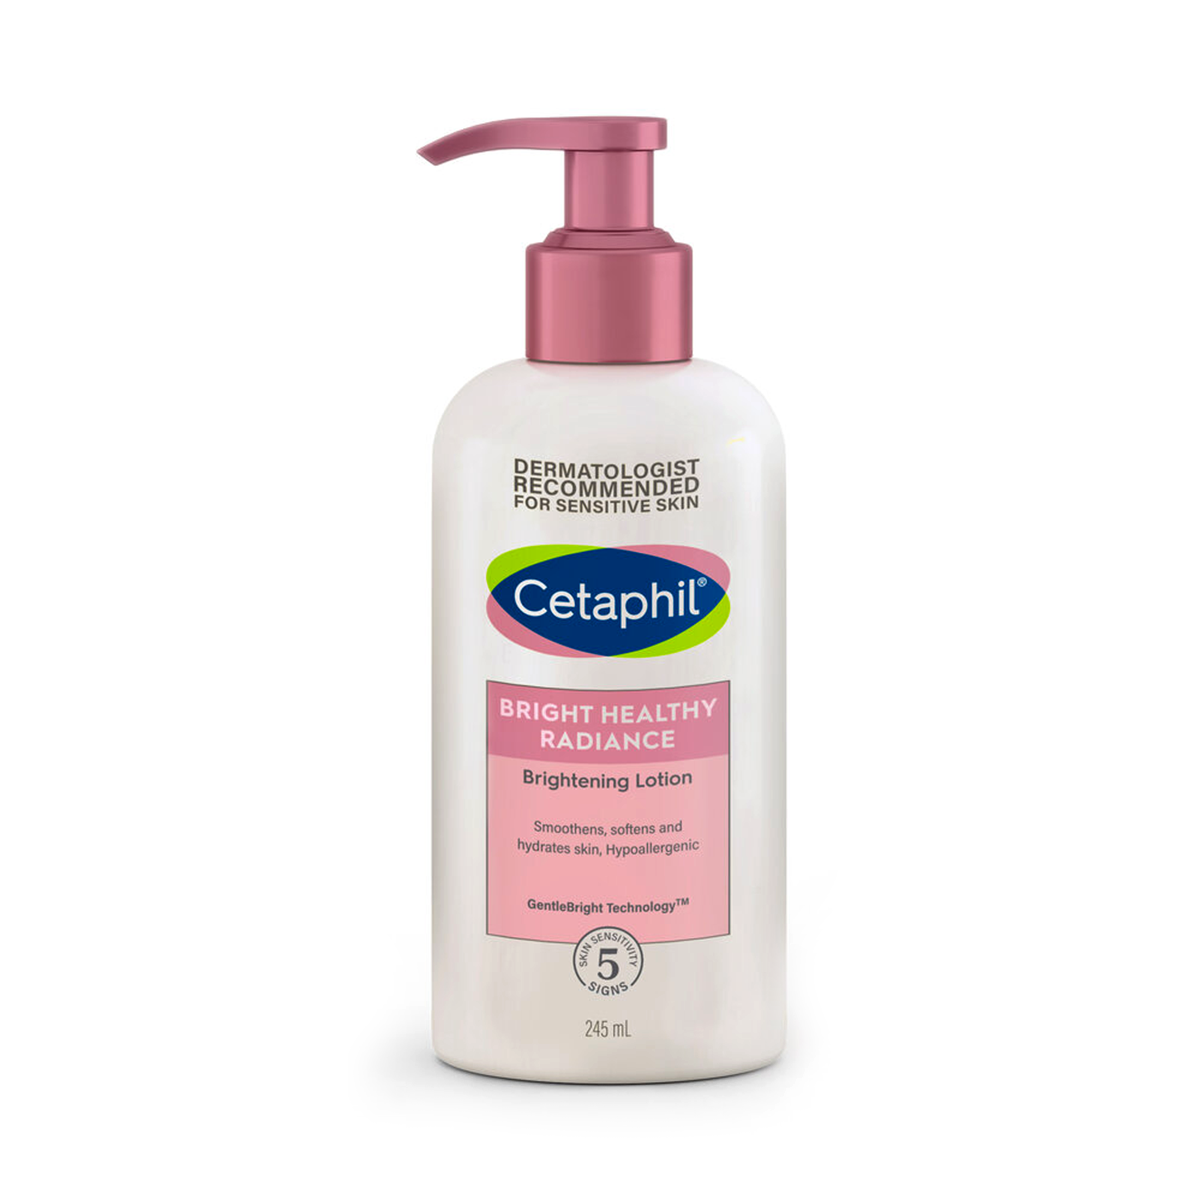 First product image of Cetaphil Bright Healthy Radiance Lotion 245ml